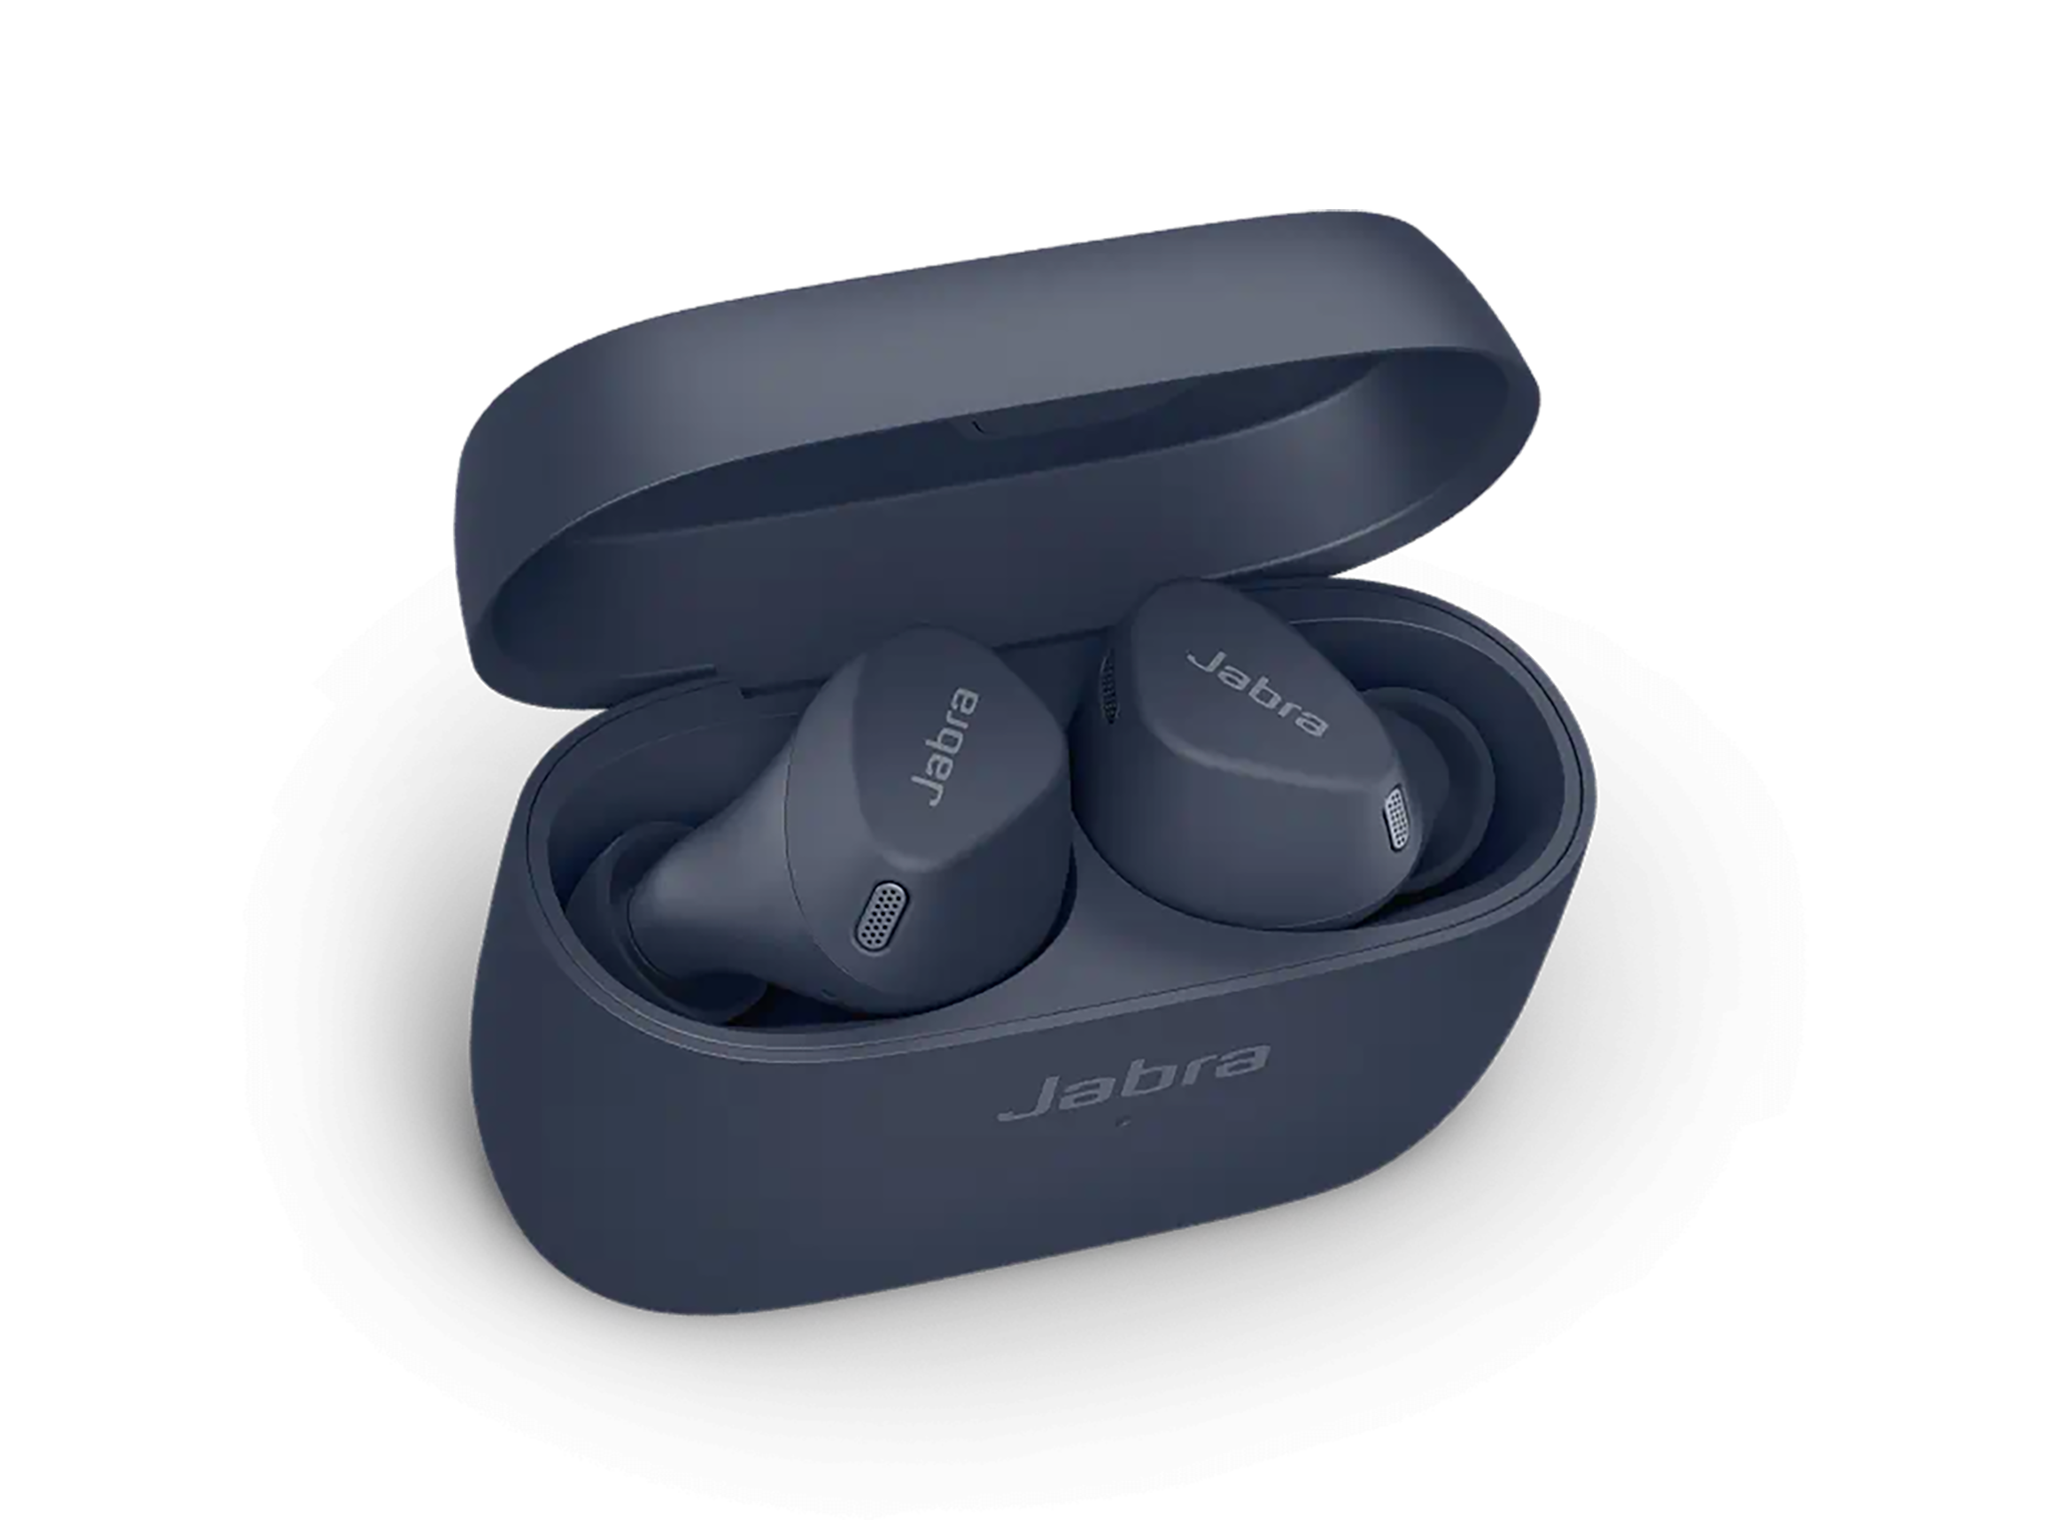 Jabra elite 4 active review: Wireless fitness earbuds with impressive tech  | The Independent